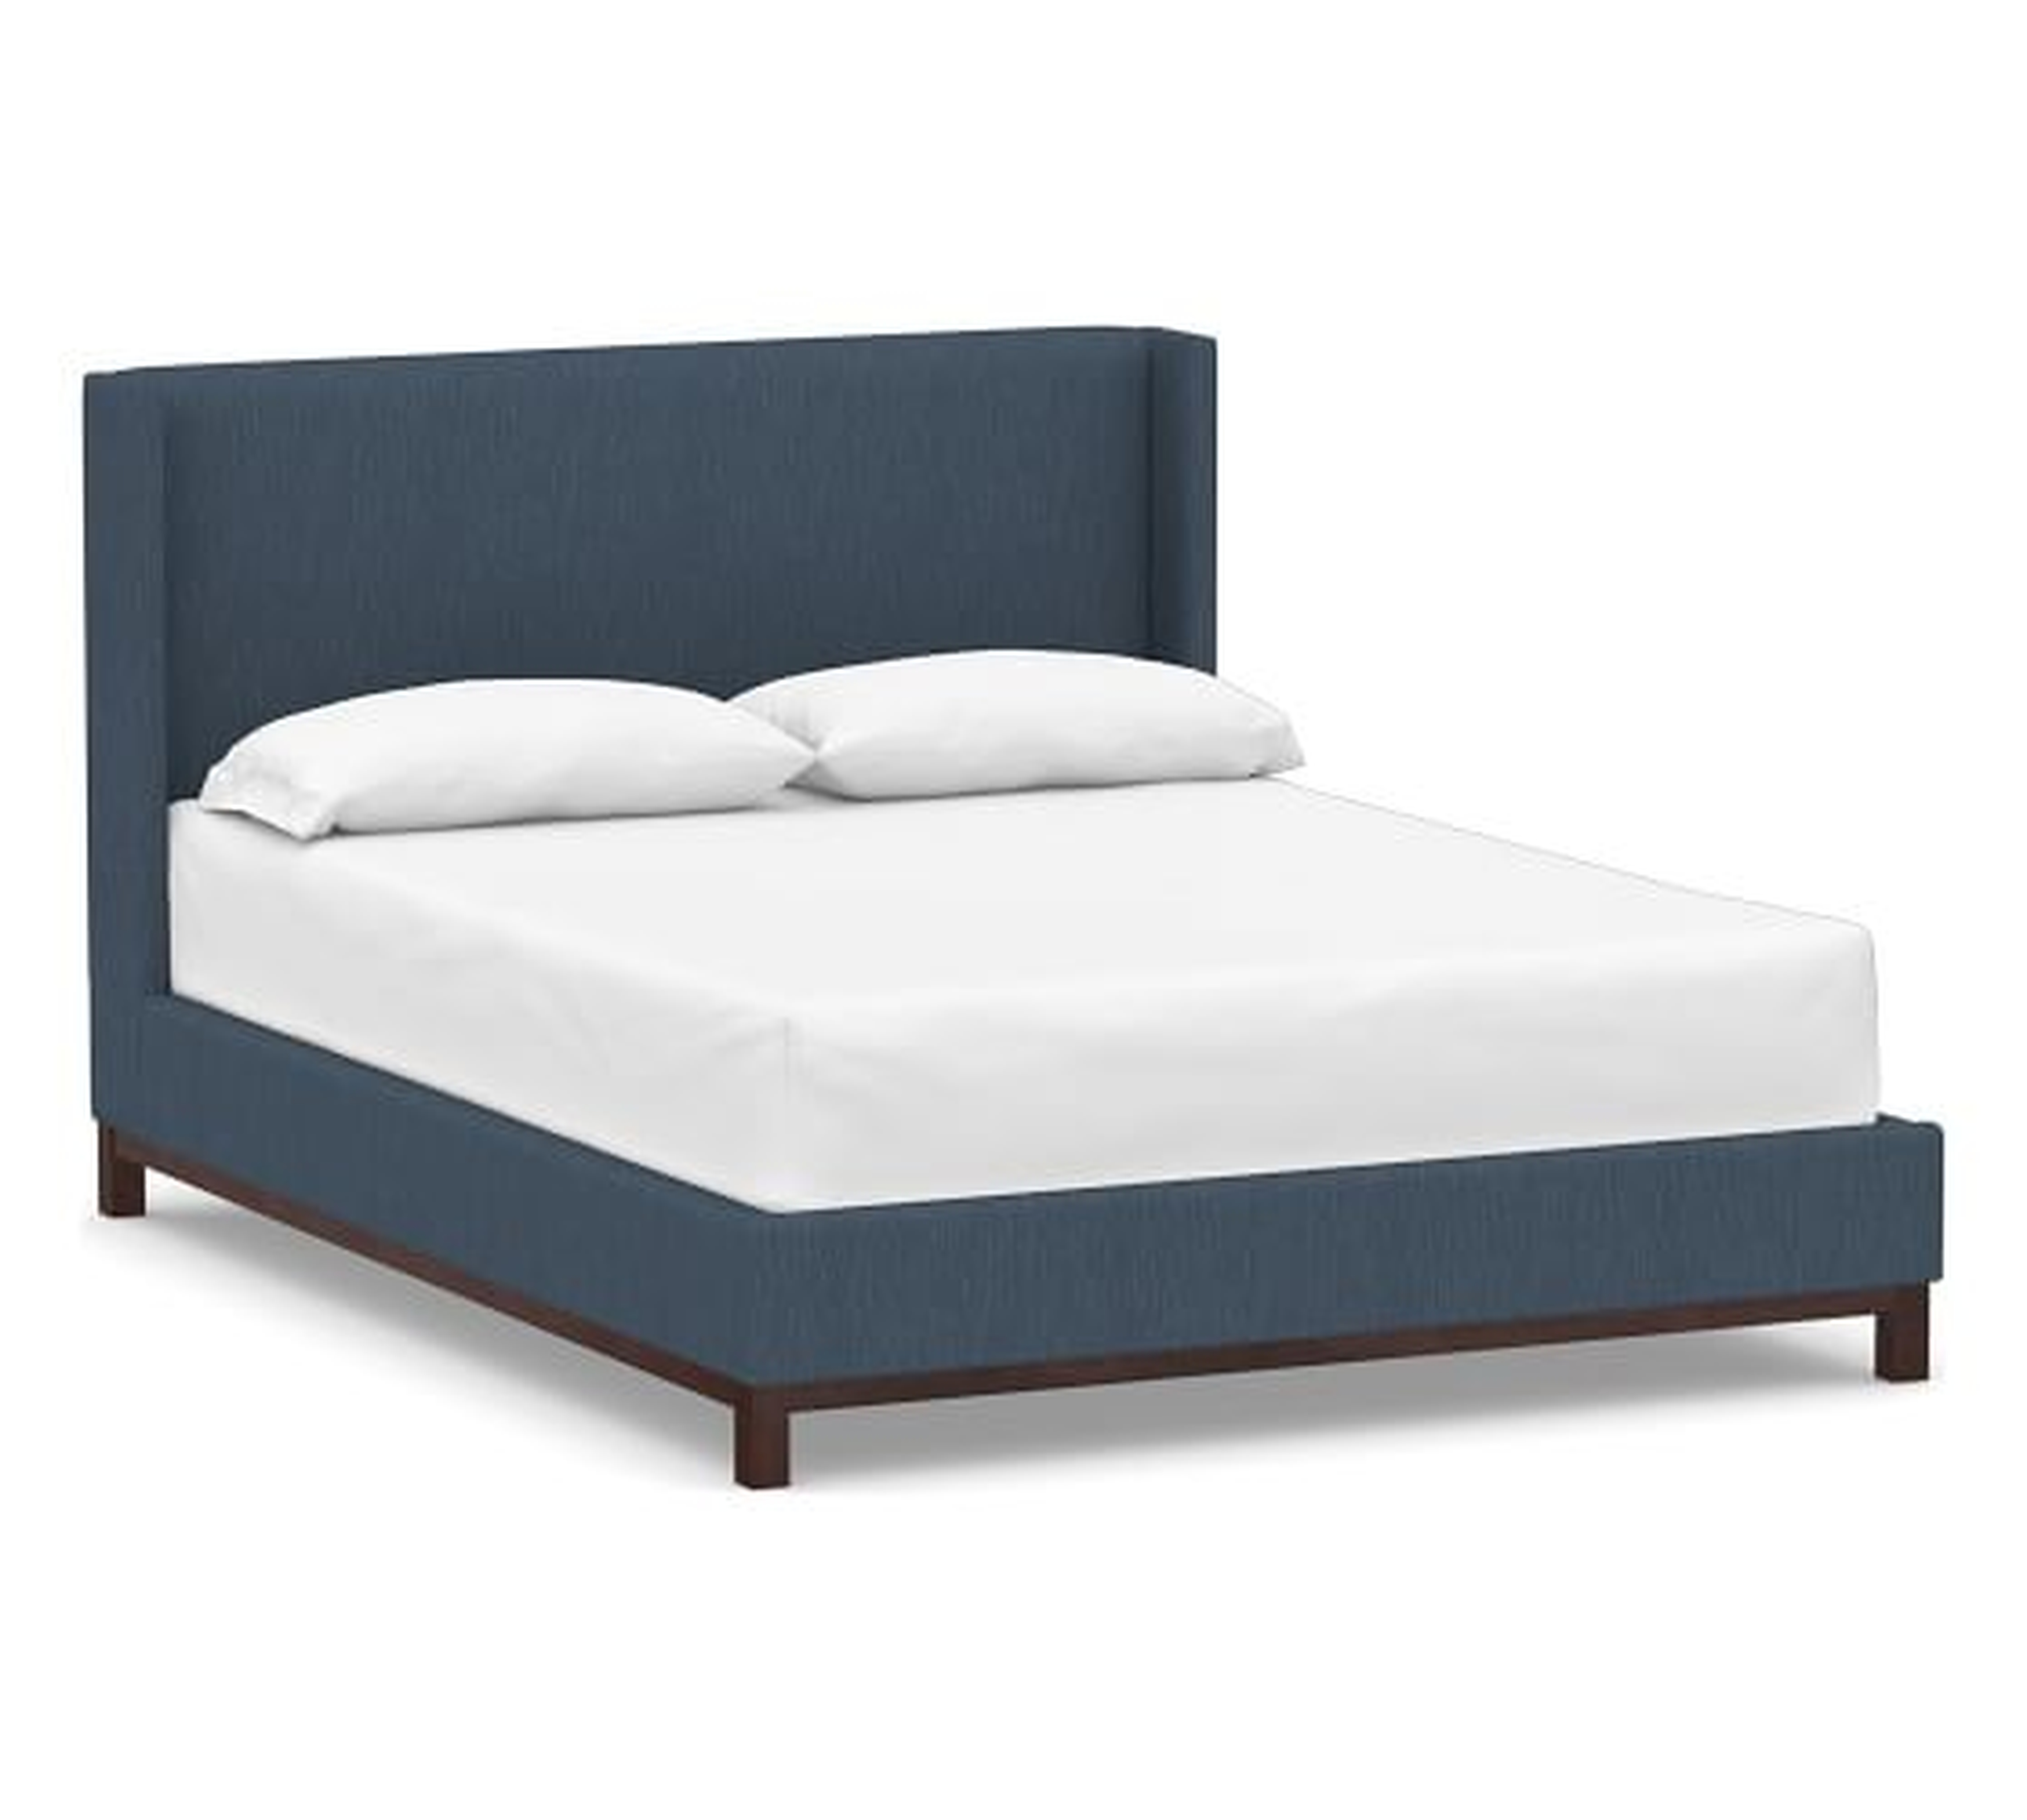 Jake Upholstered Bed with Mahogany Frame, Queen, Performance Heathered Tweed Indigo - Pottery Barn